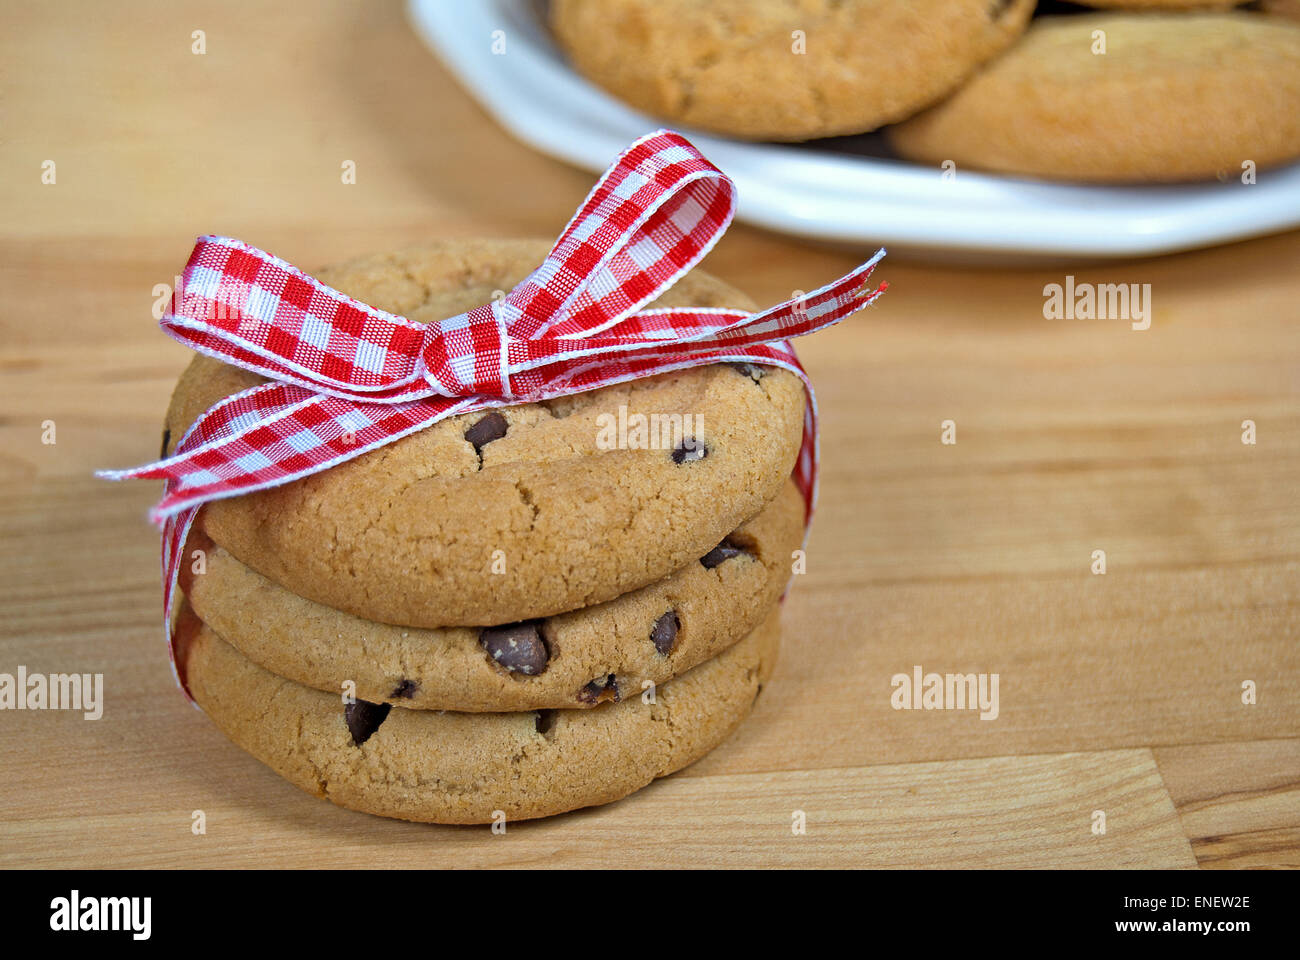 Stack of chocolate chip cookies with red and white gingham bow. Stock Photo